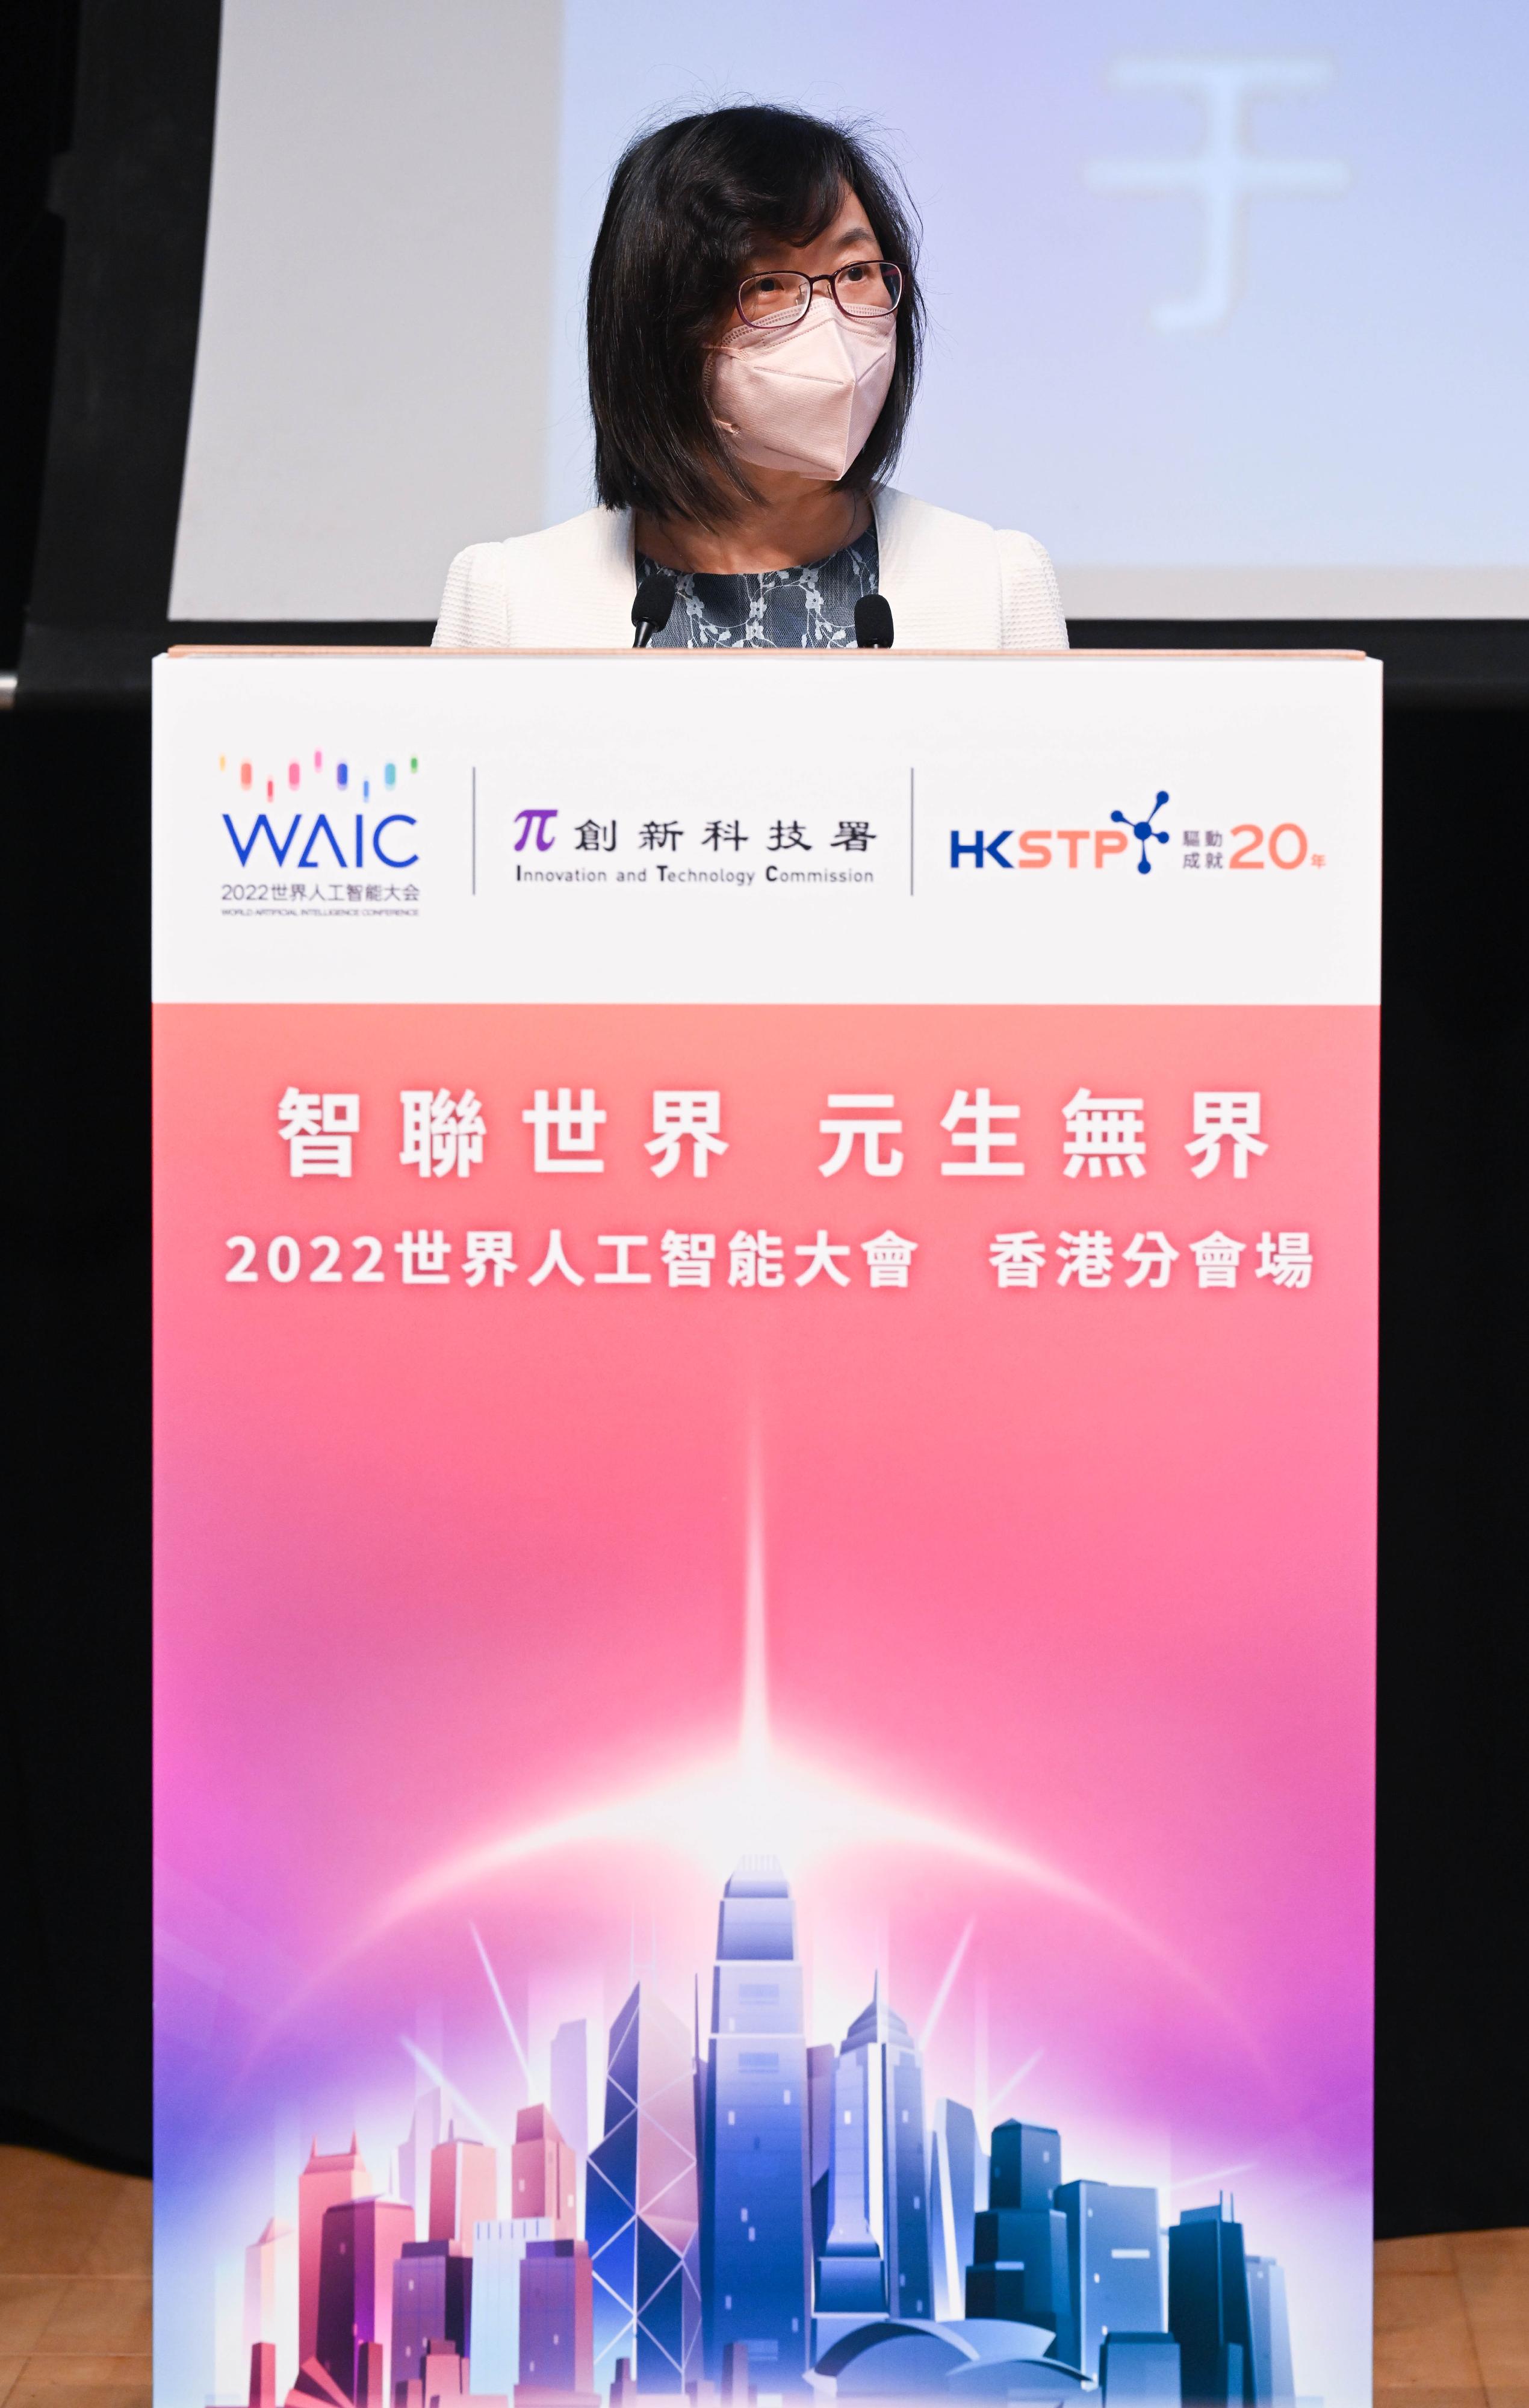 The Commissioner for Innovation and Technology, Ms Rebecca Pun, delivers welcoming remarks at the World Artificial Intelligence Conference 2022 - Hong Kong Branch today (September 1).